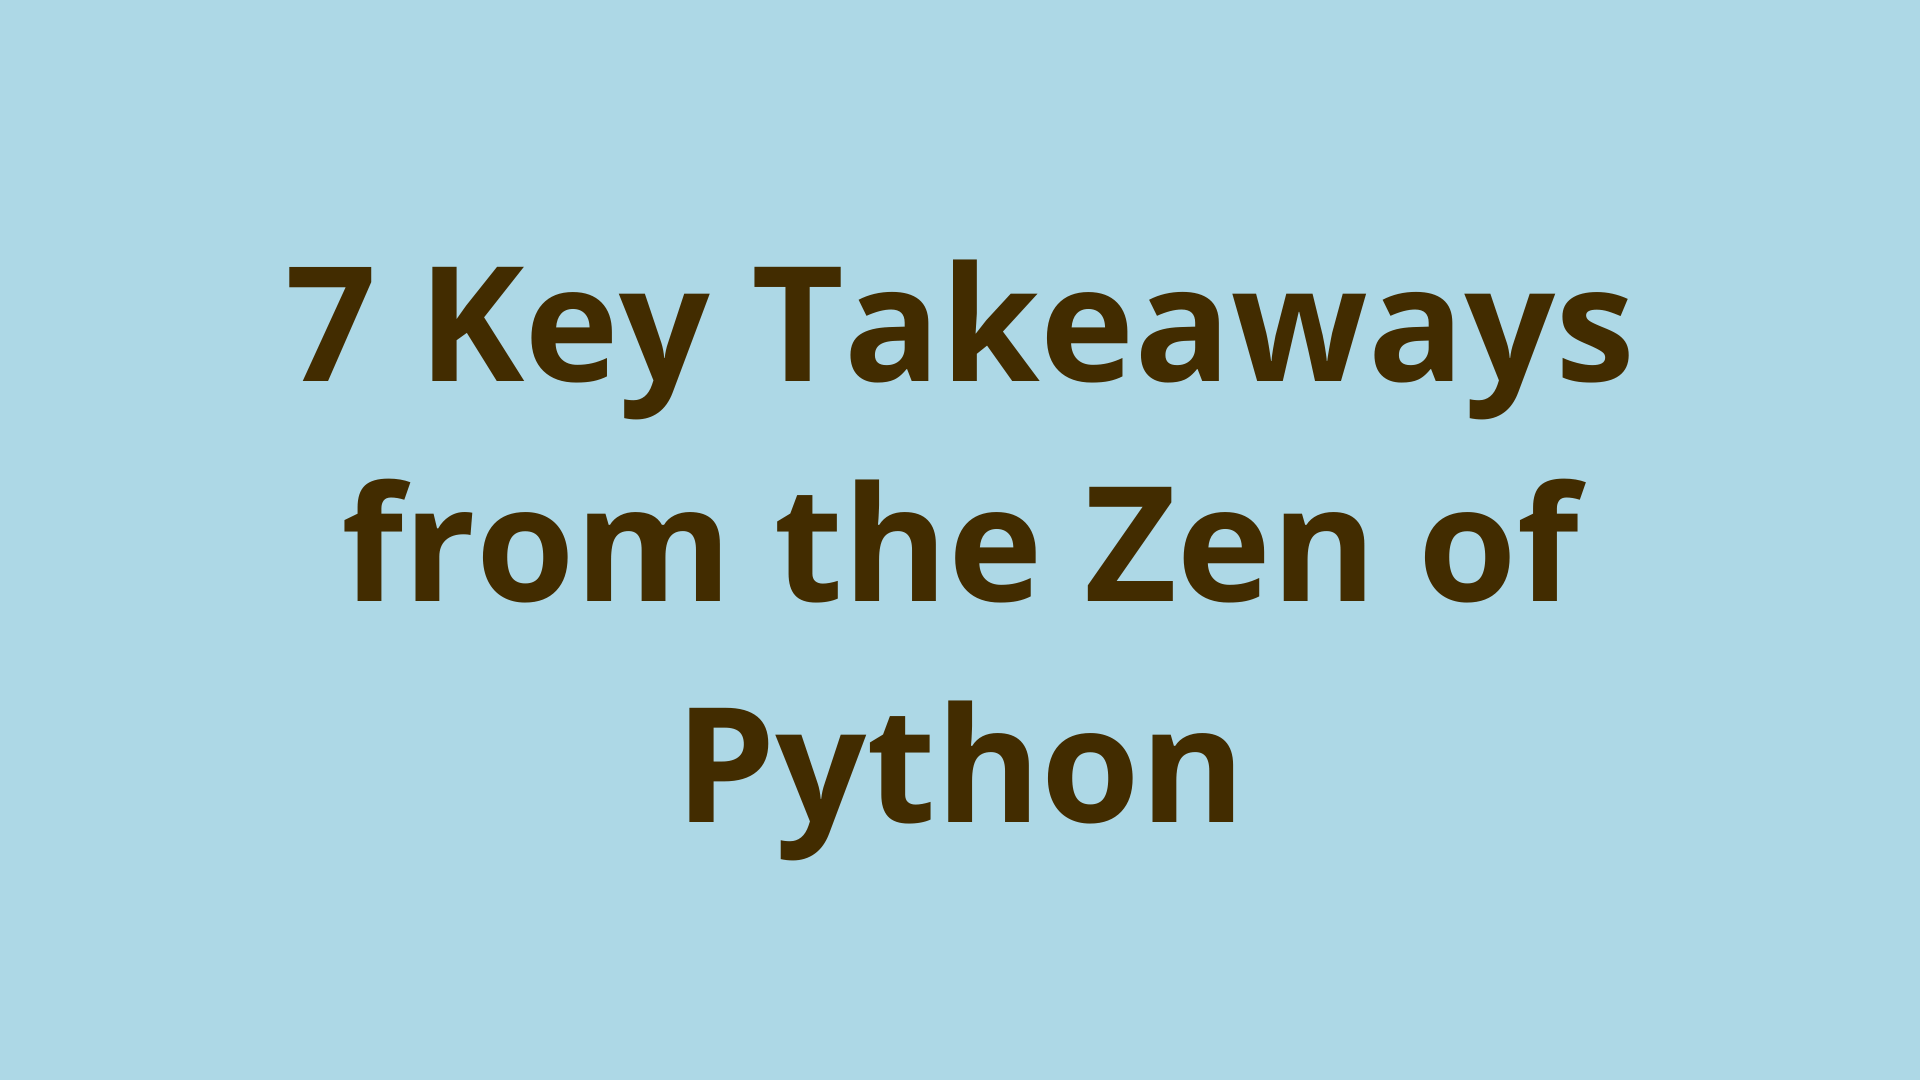 Image of 7 Key Takeaways from the Zen of Python